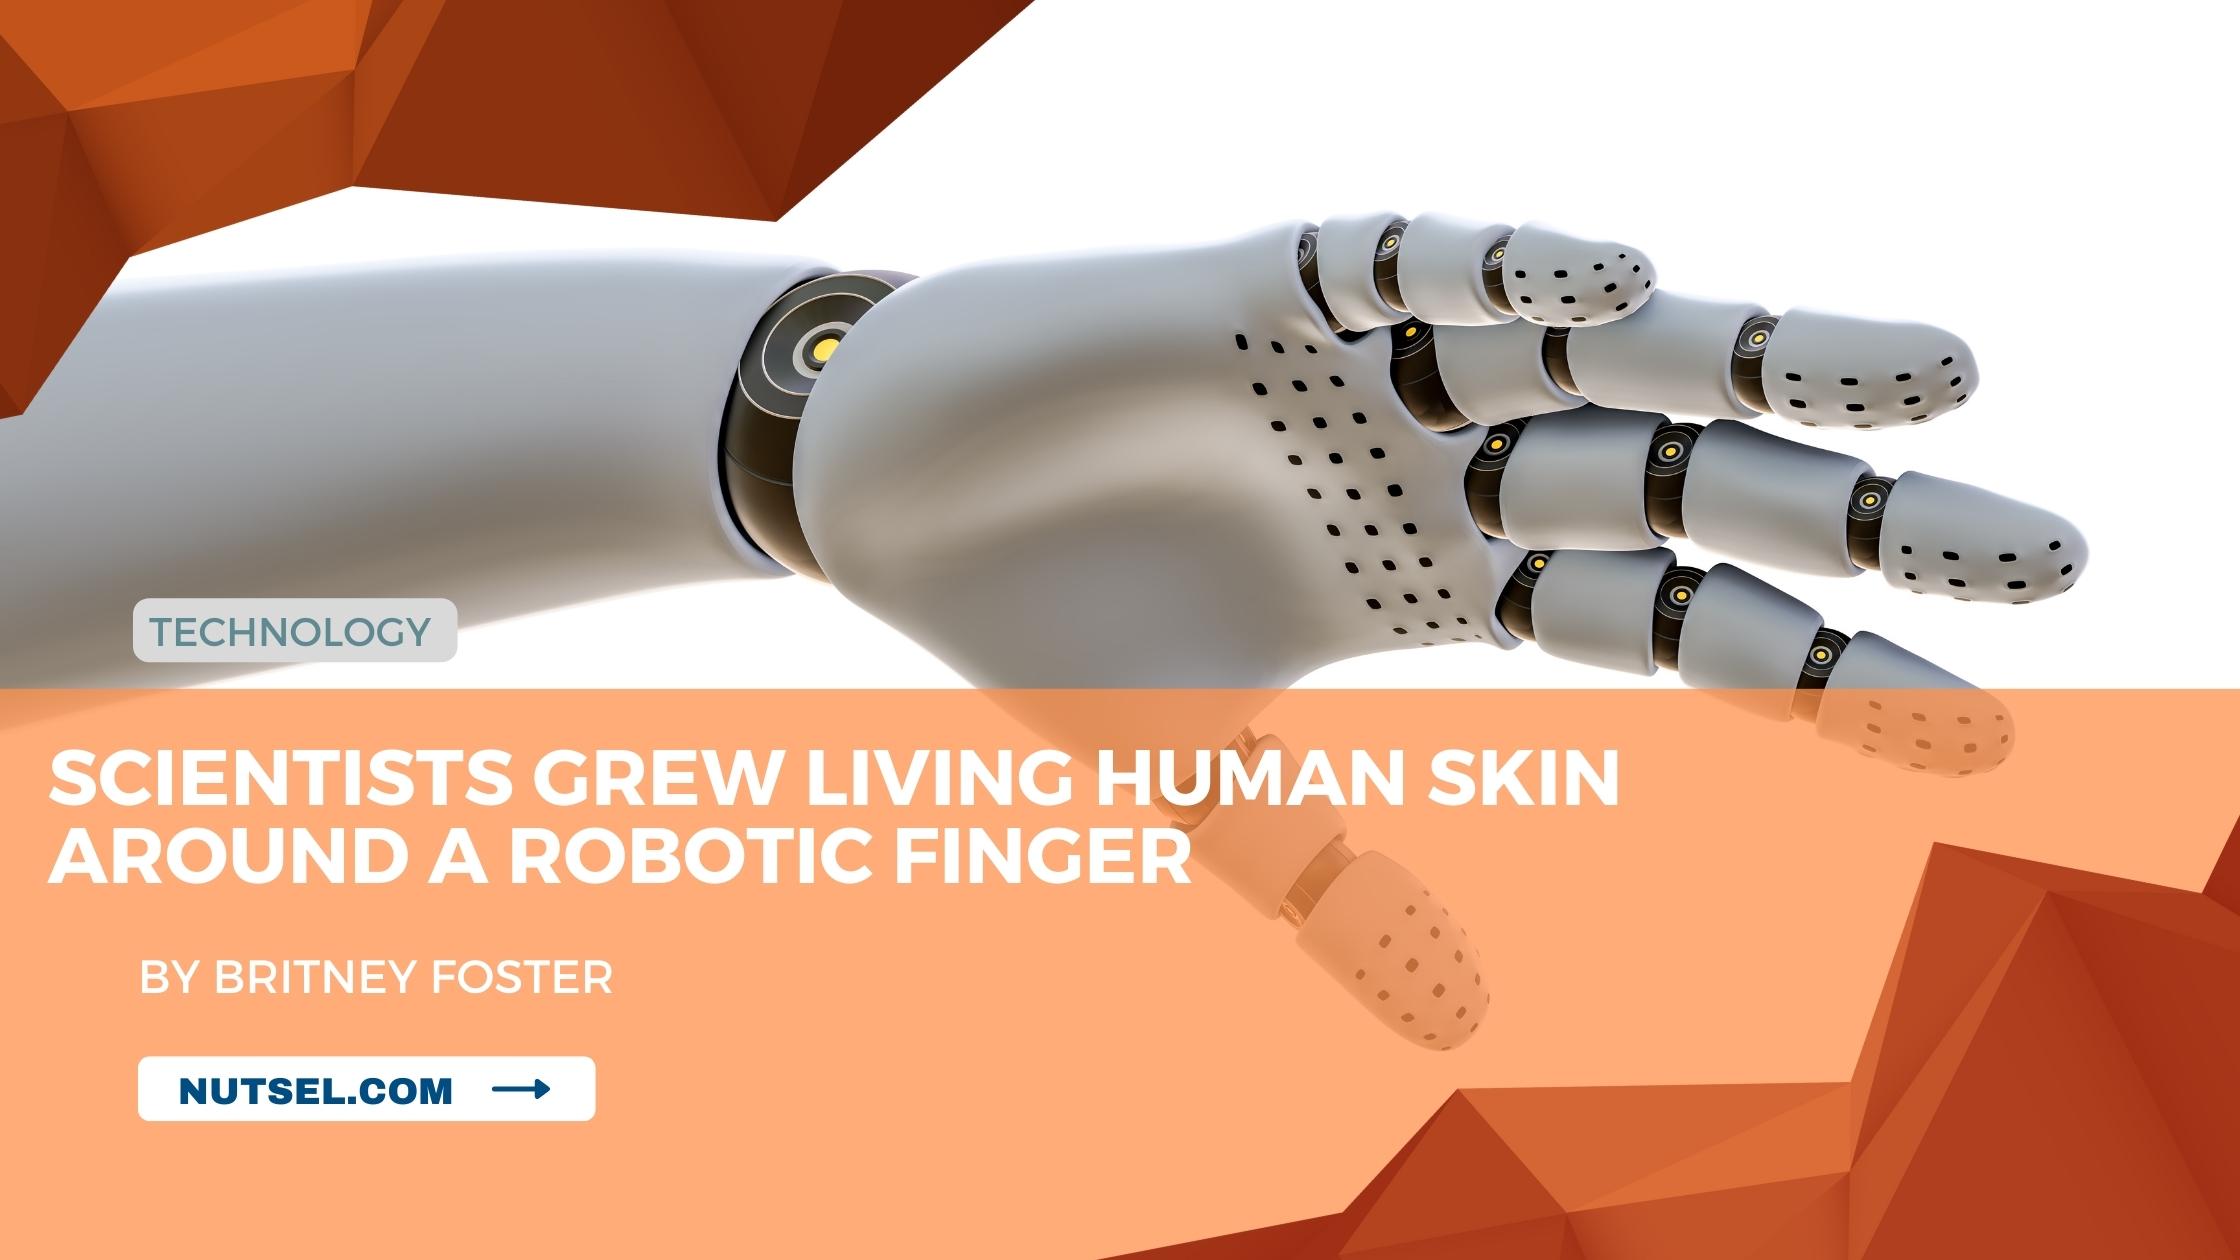 Scientists grew living human skin around a robotic finger